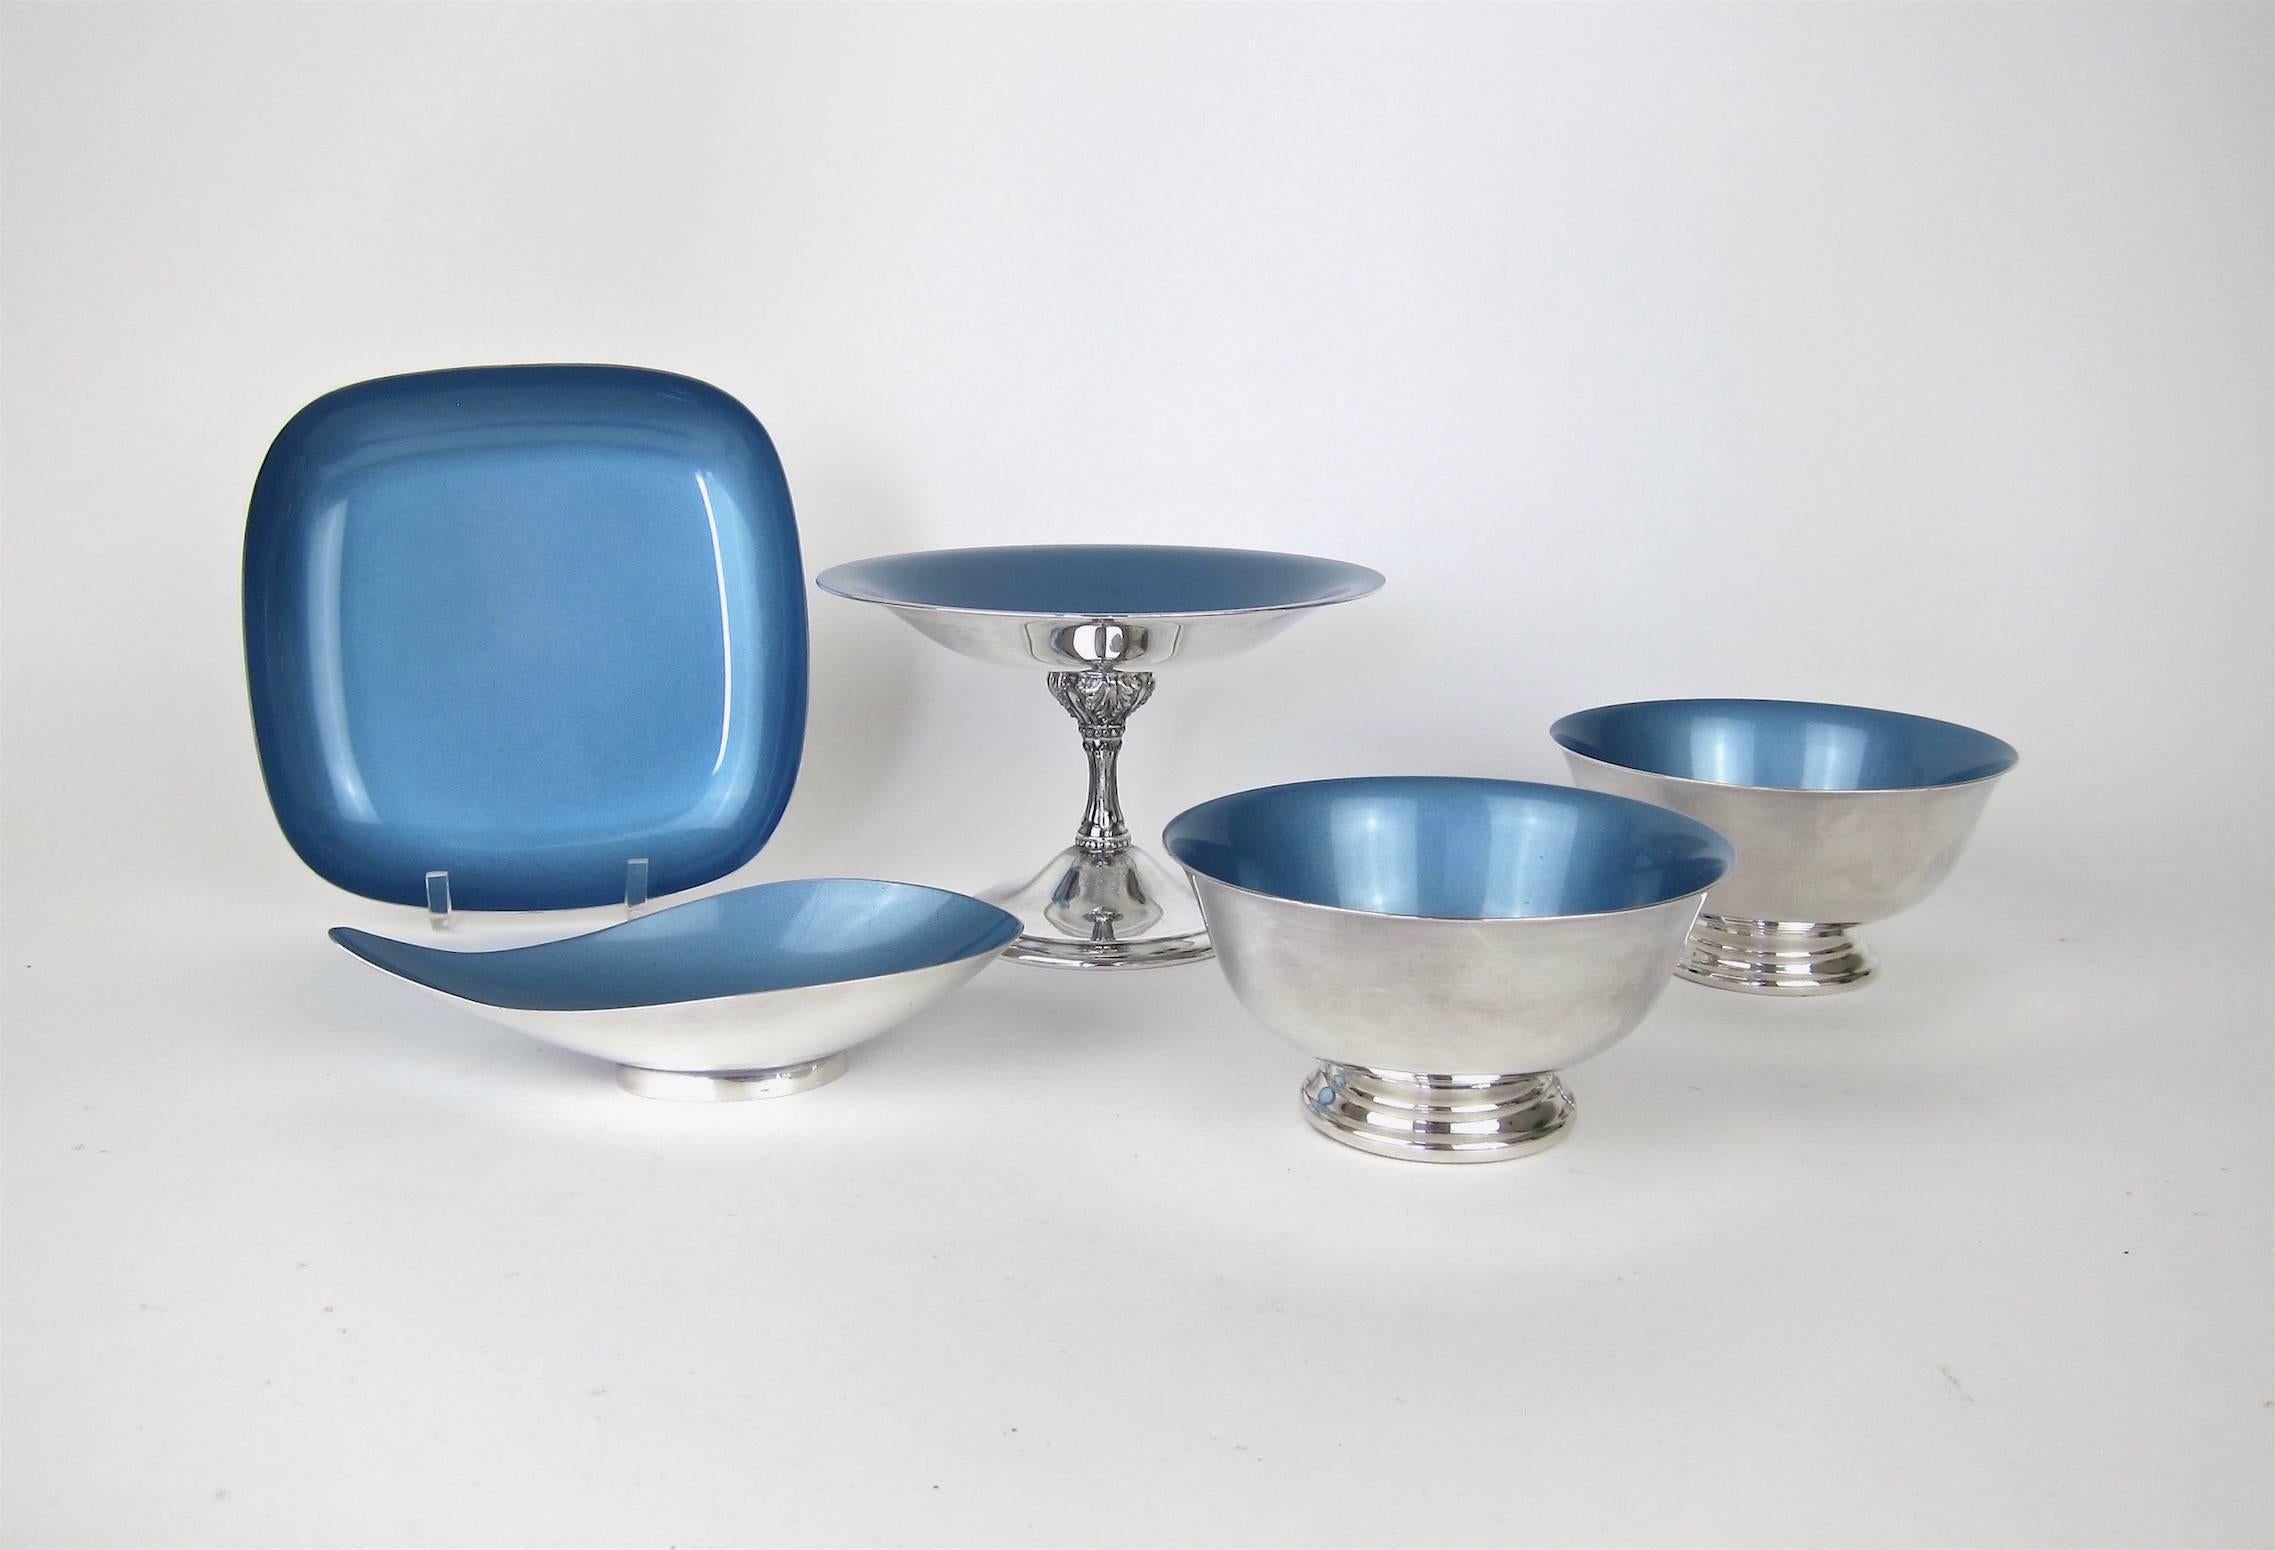 An exquisite collection of Mid-Century Modern silver plate designed by metal smith John Prip (1922-2009) and introduced by Reed and Barton as the "Color-Clad" line in 1961. Each vintage item is decorated with a gorgeous, icy blue enameled